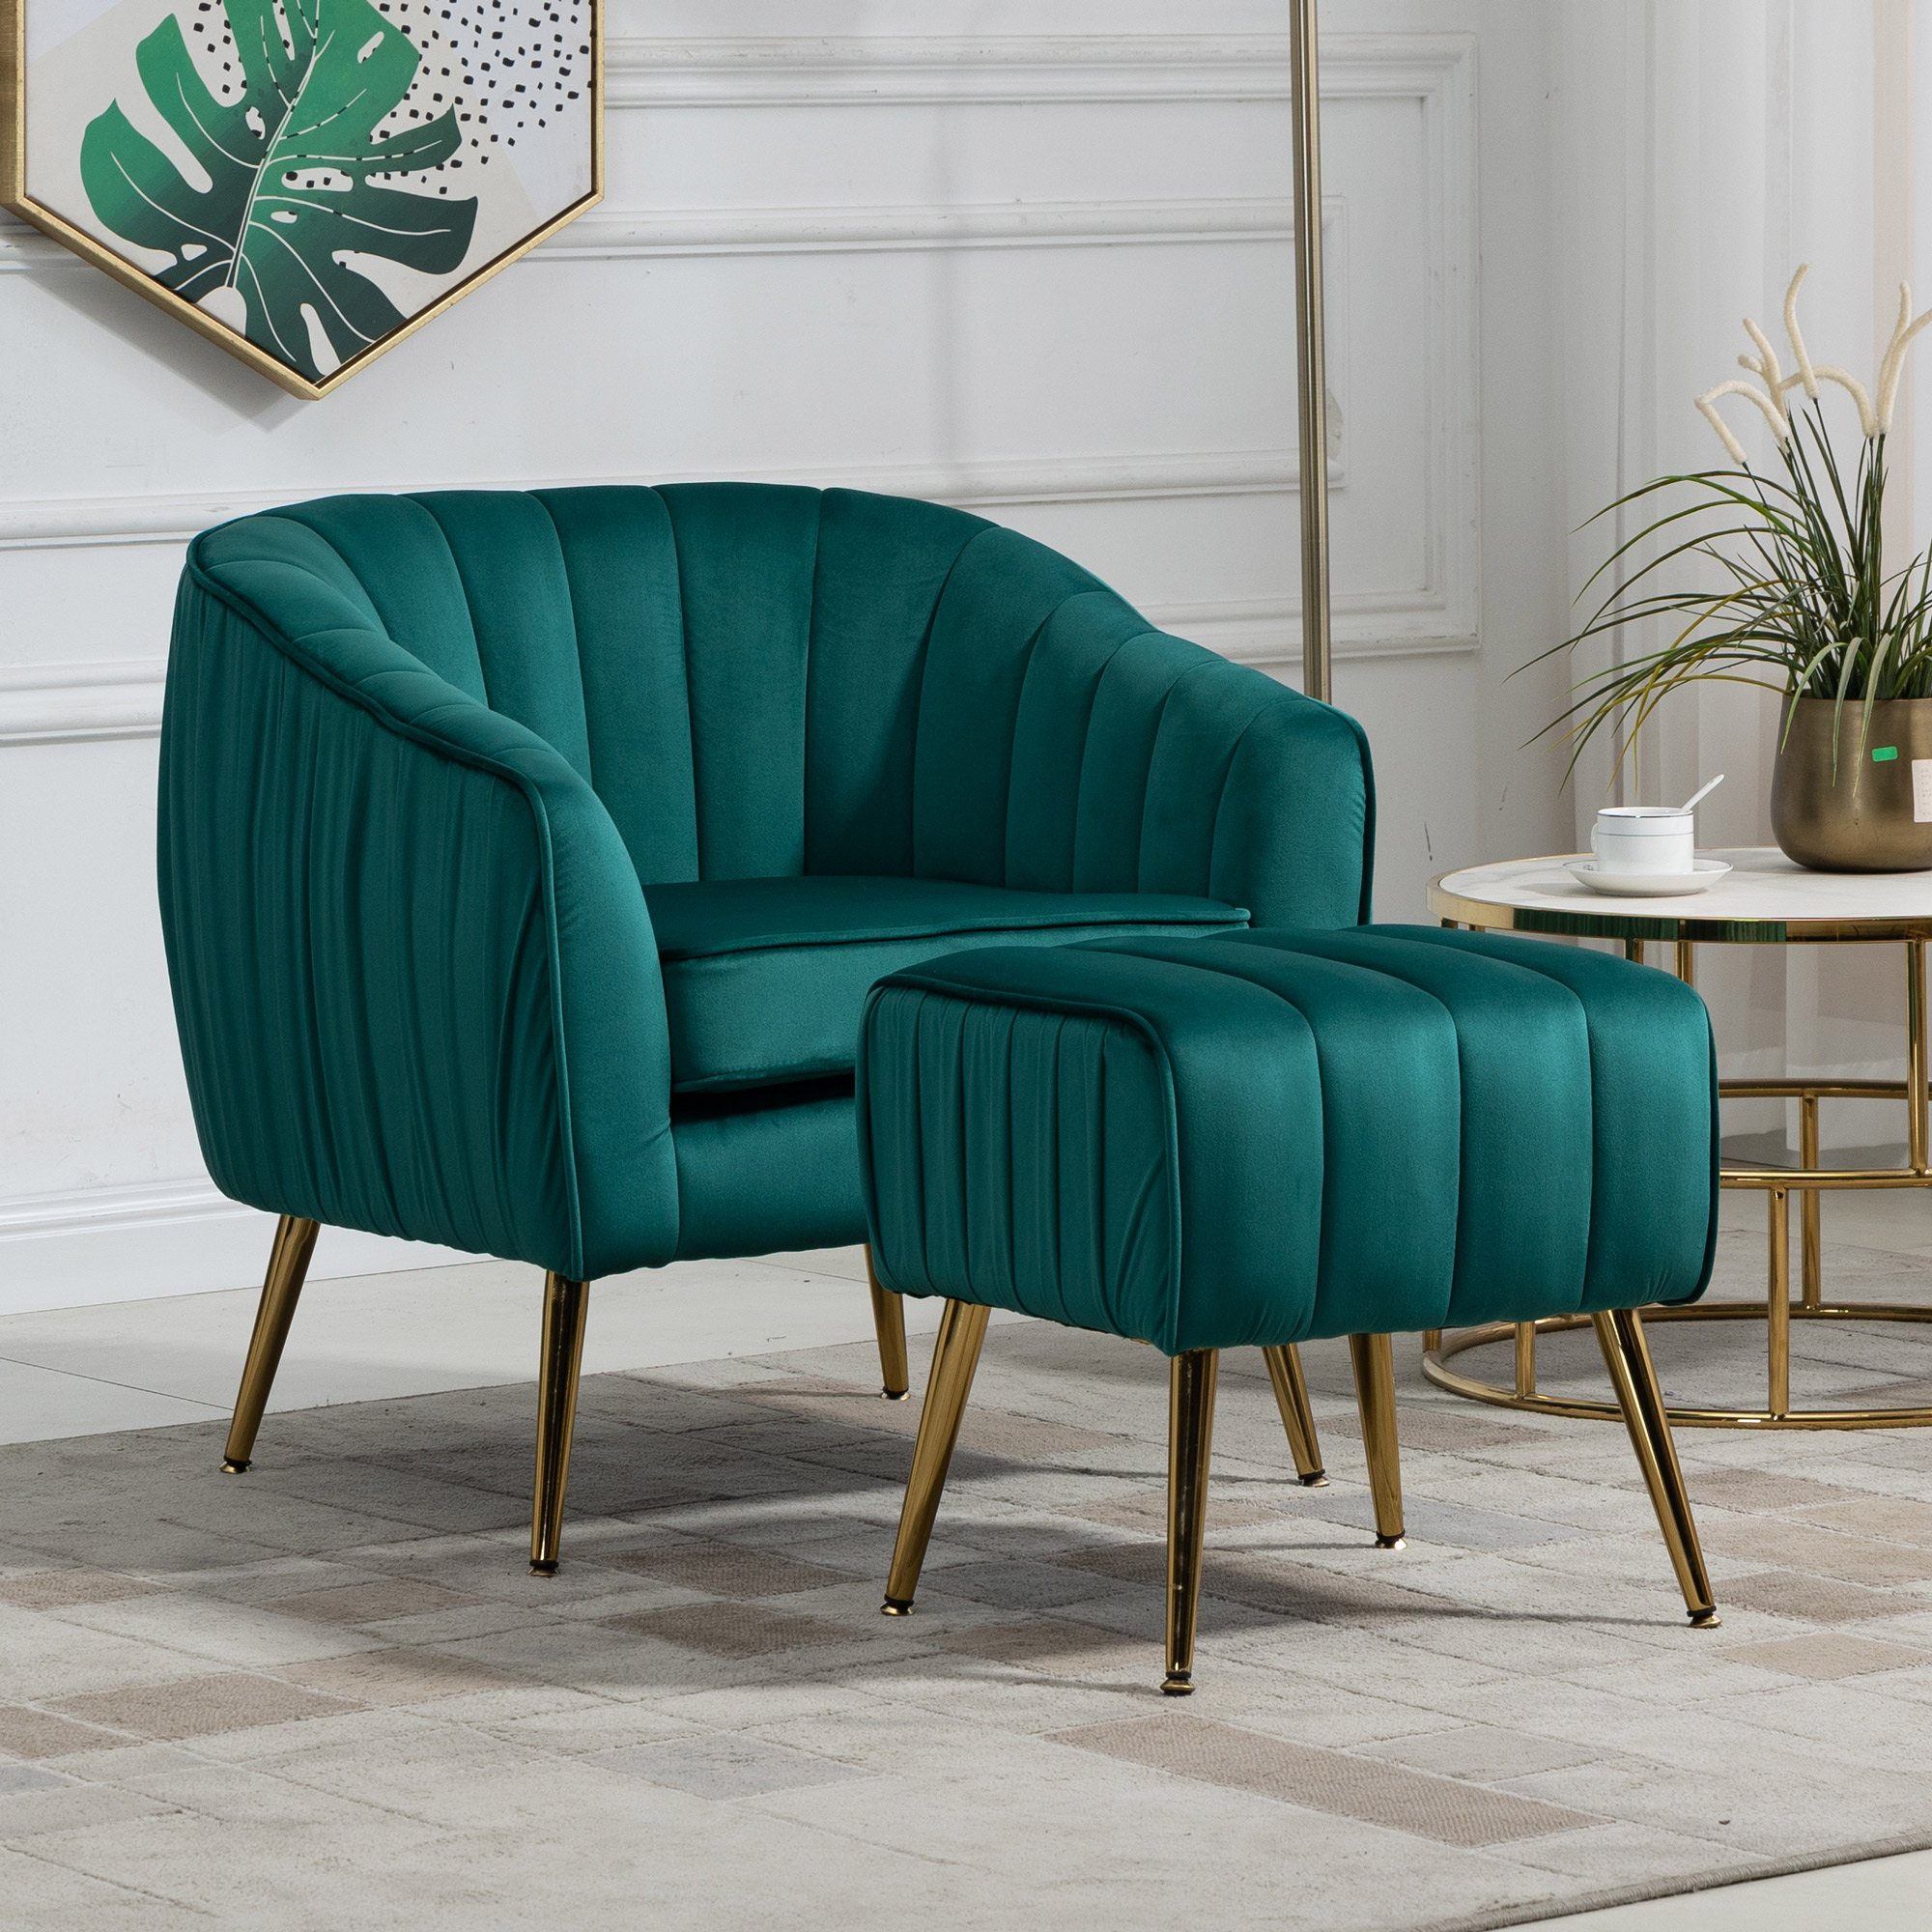 Velvet Accent Chair with Ottoman, Modern Tufted Barrel Chair Ottoman Set for Living Room Bedroom, Golden Finished, Christmas Green-CASAINC